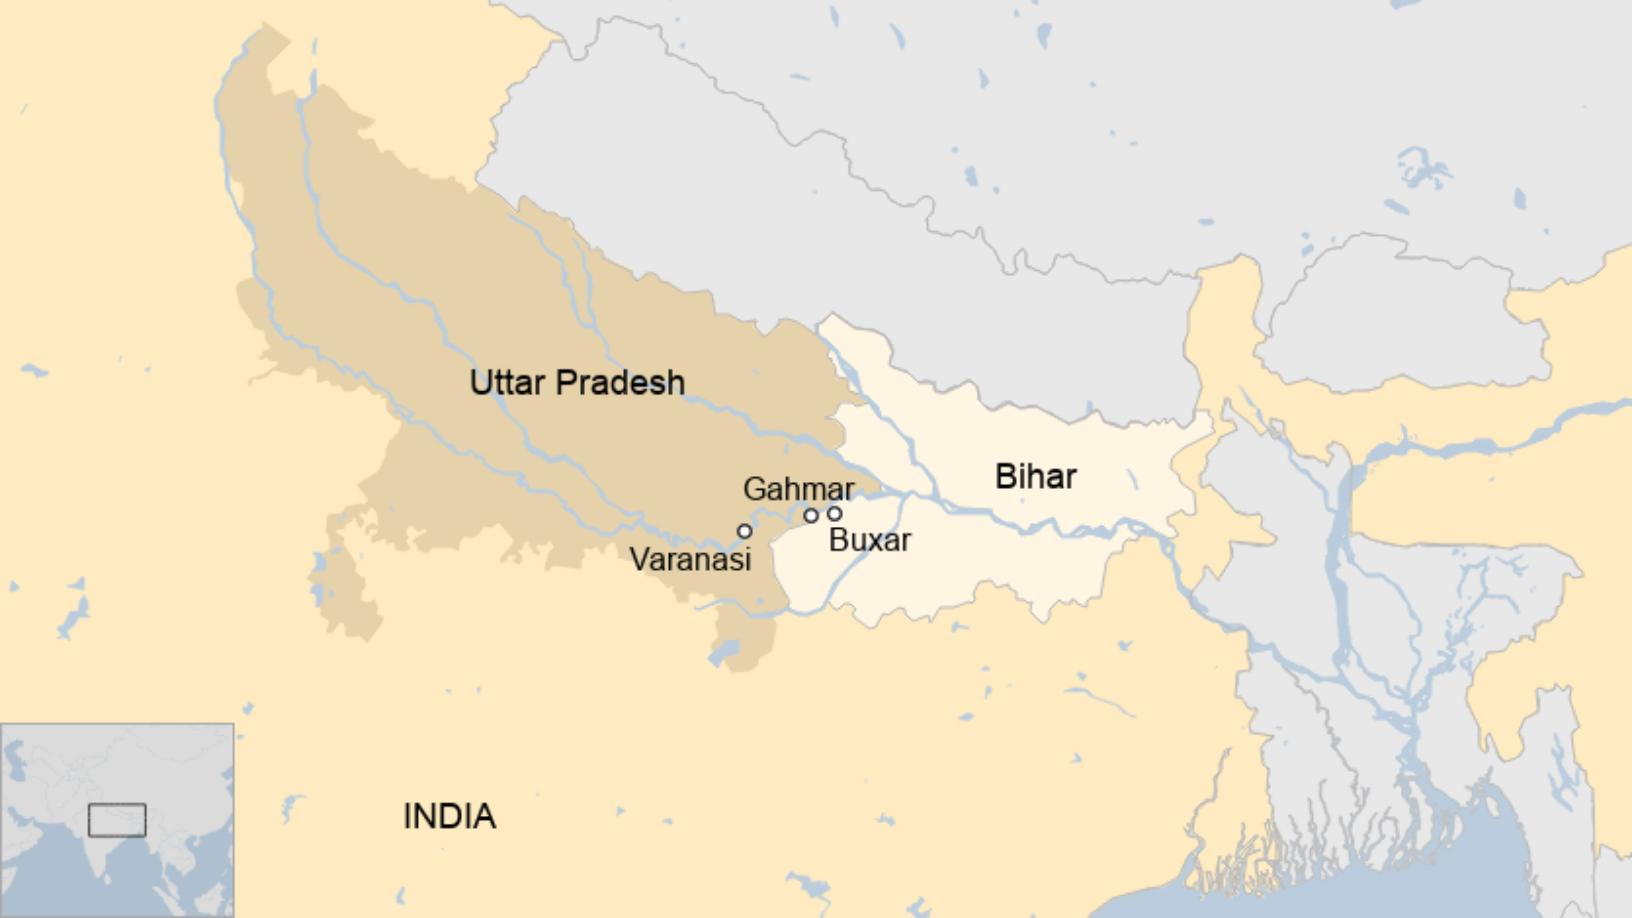 India Covid: Dozens more bodies wash up on Ganges river bank - BBC News